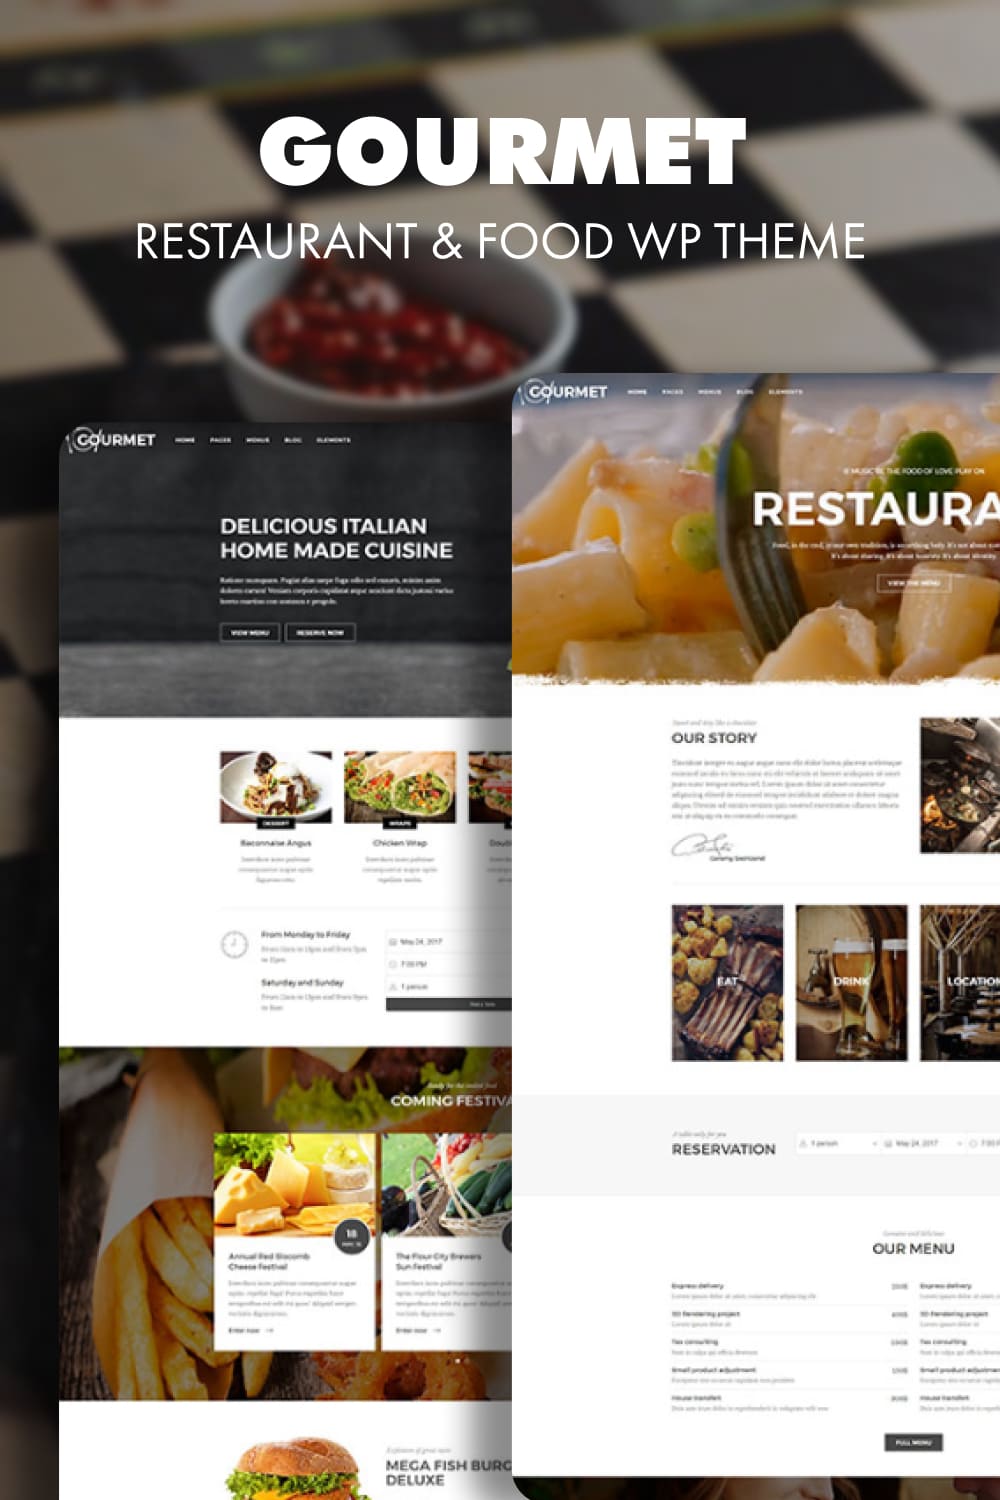 Gourmet restaurant and food theme.